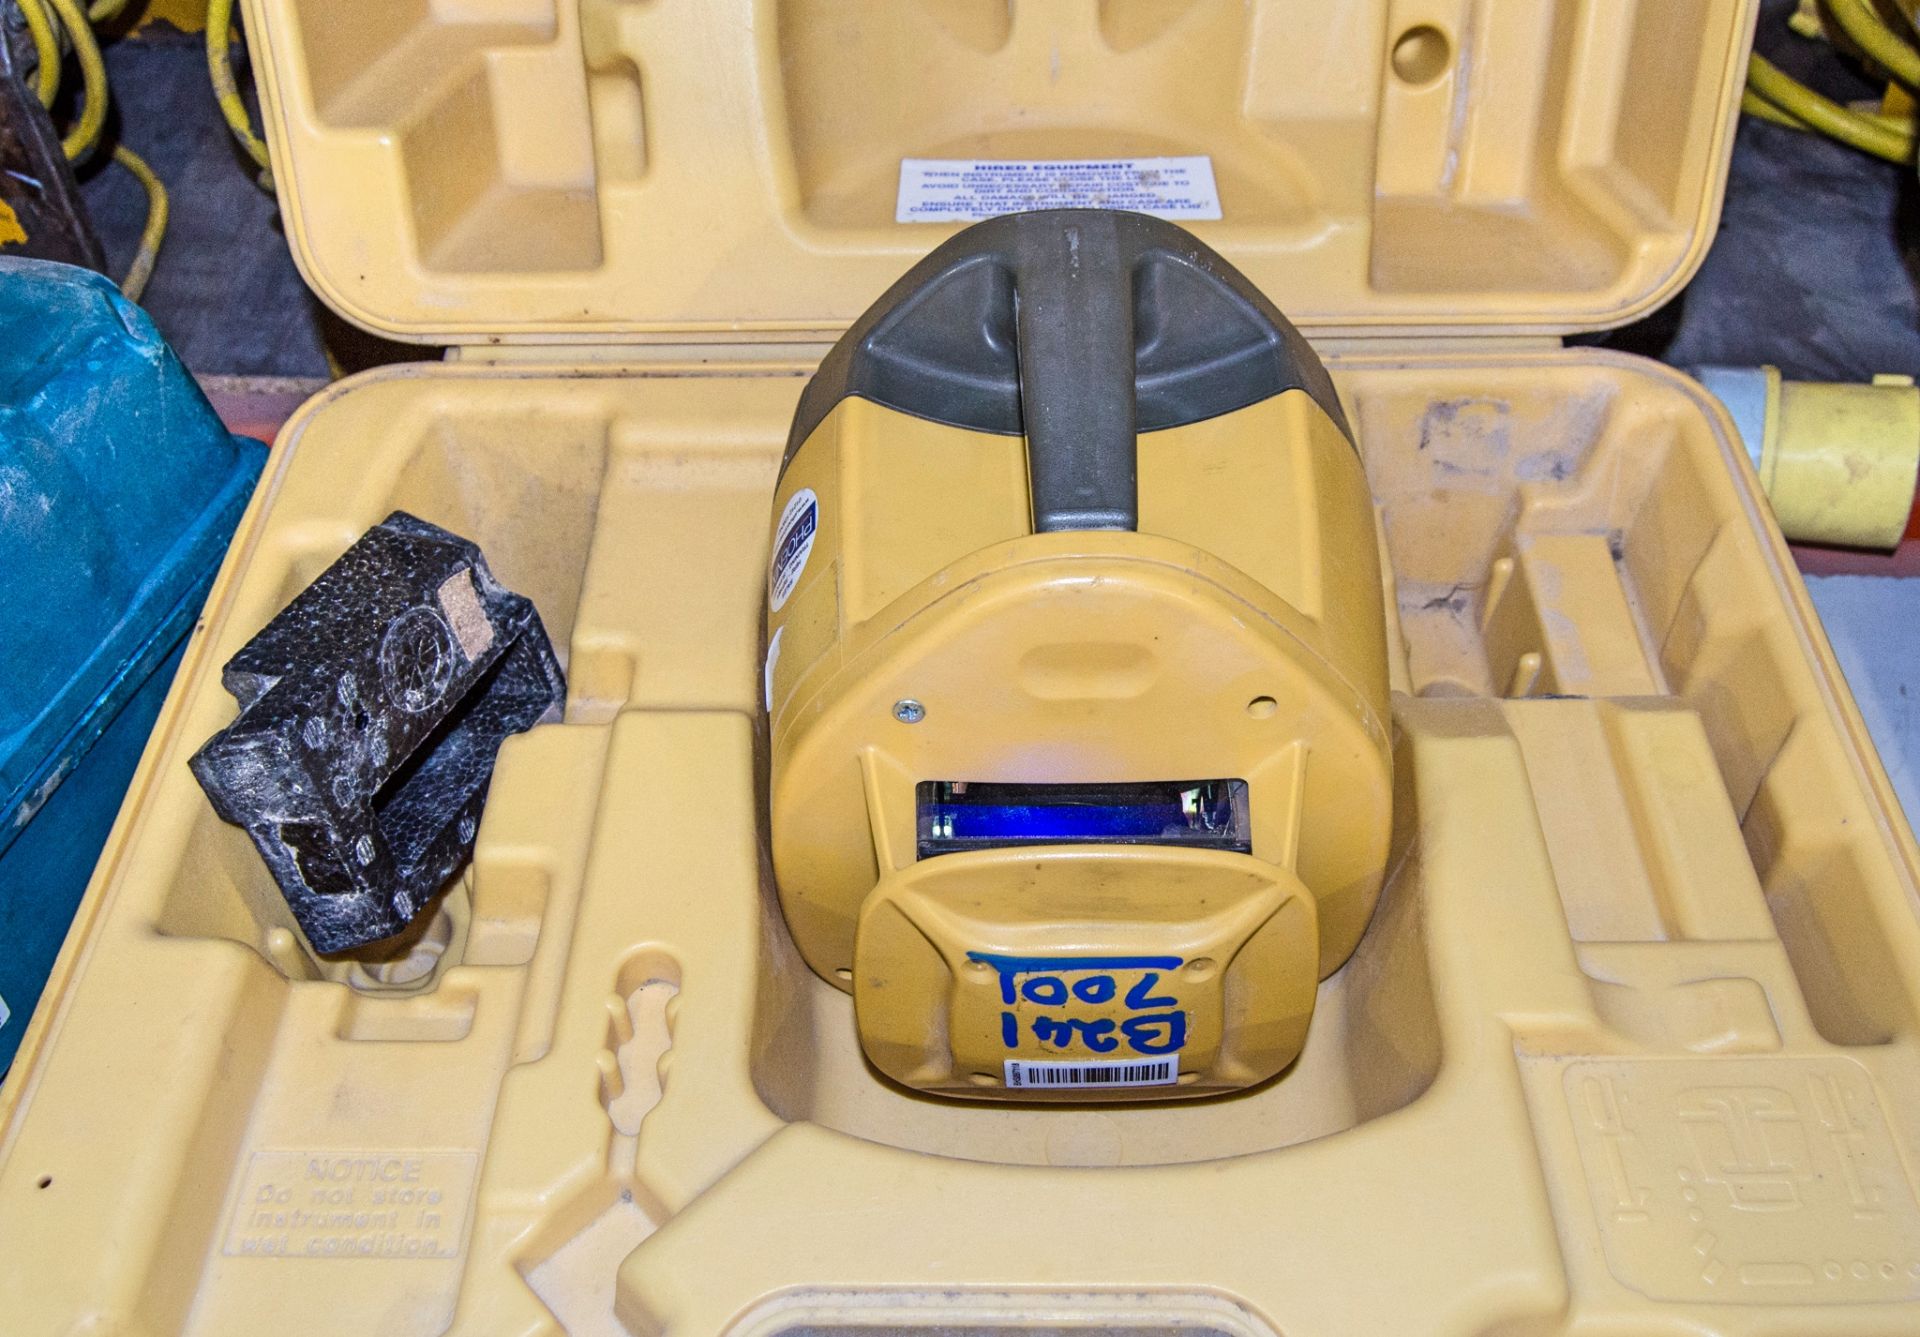 Topcon RLH3C rotating laser level c/w carry case ** No charger ** B2417001